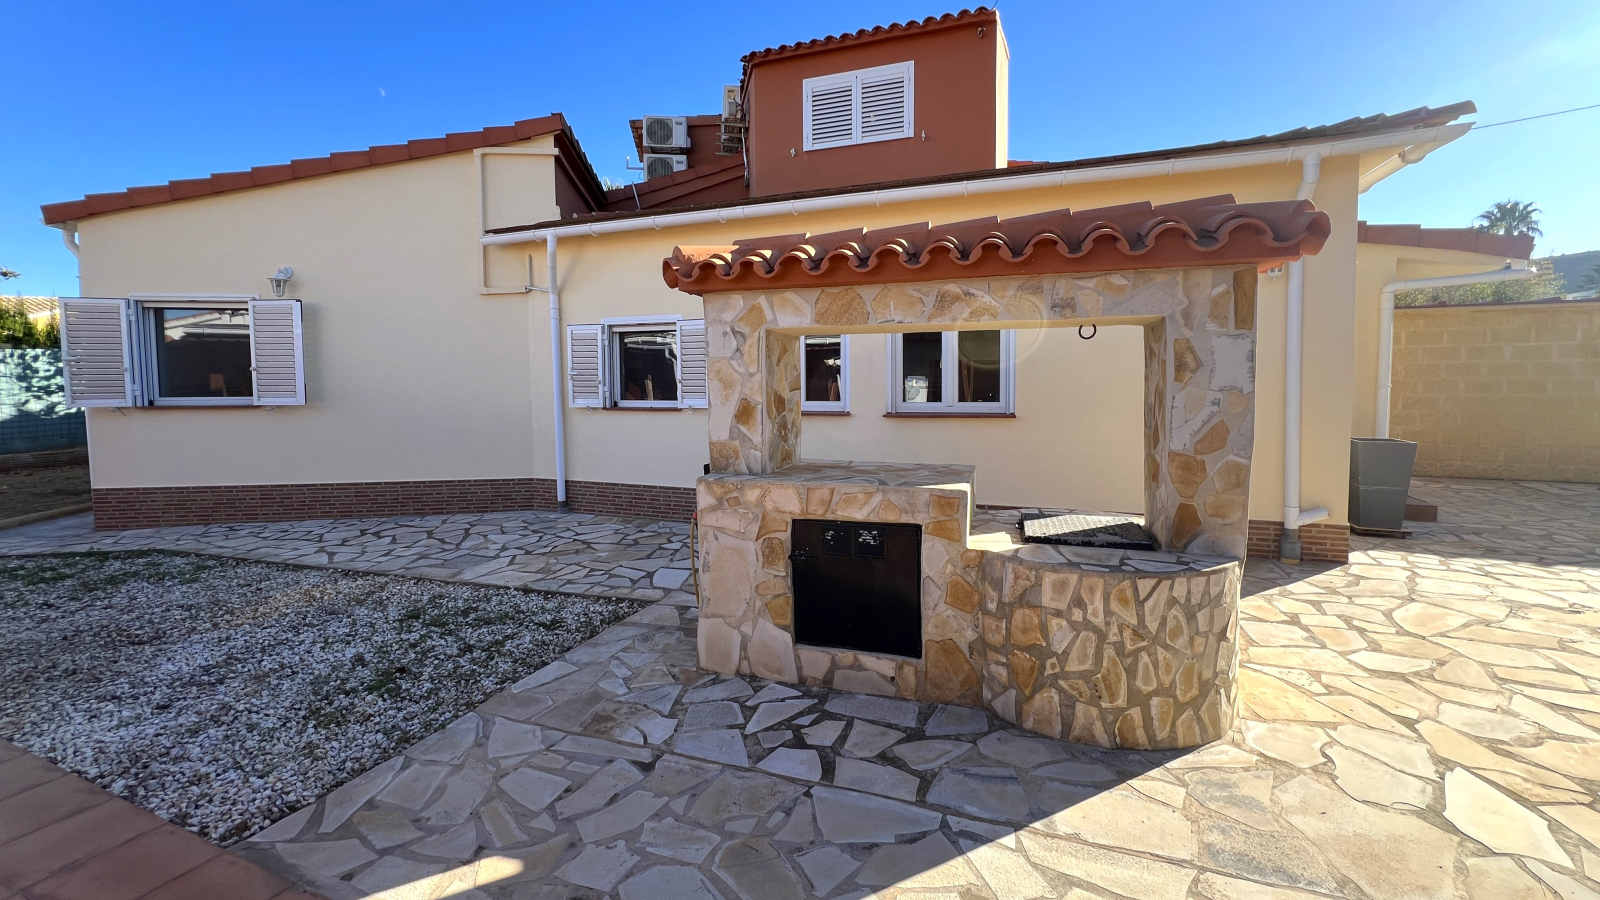 Villa in a quiet location with high technical equipment, heated pool, garage, etc.